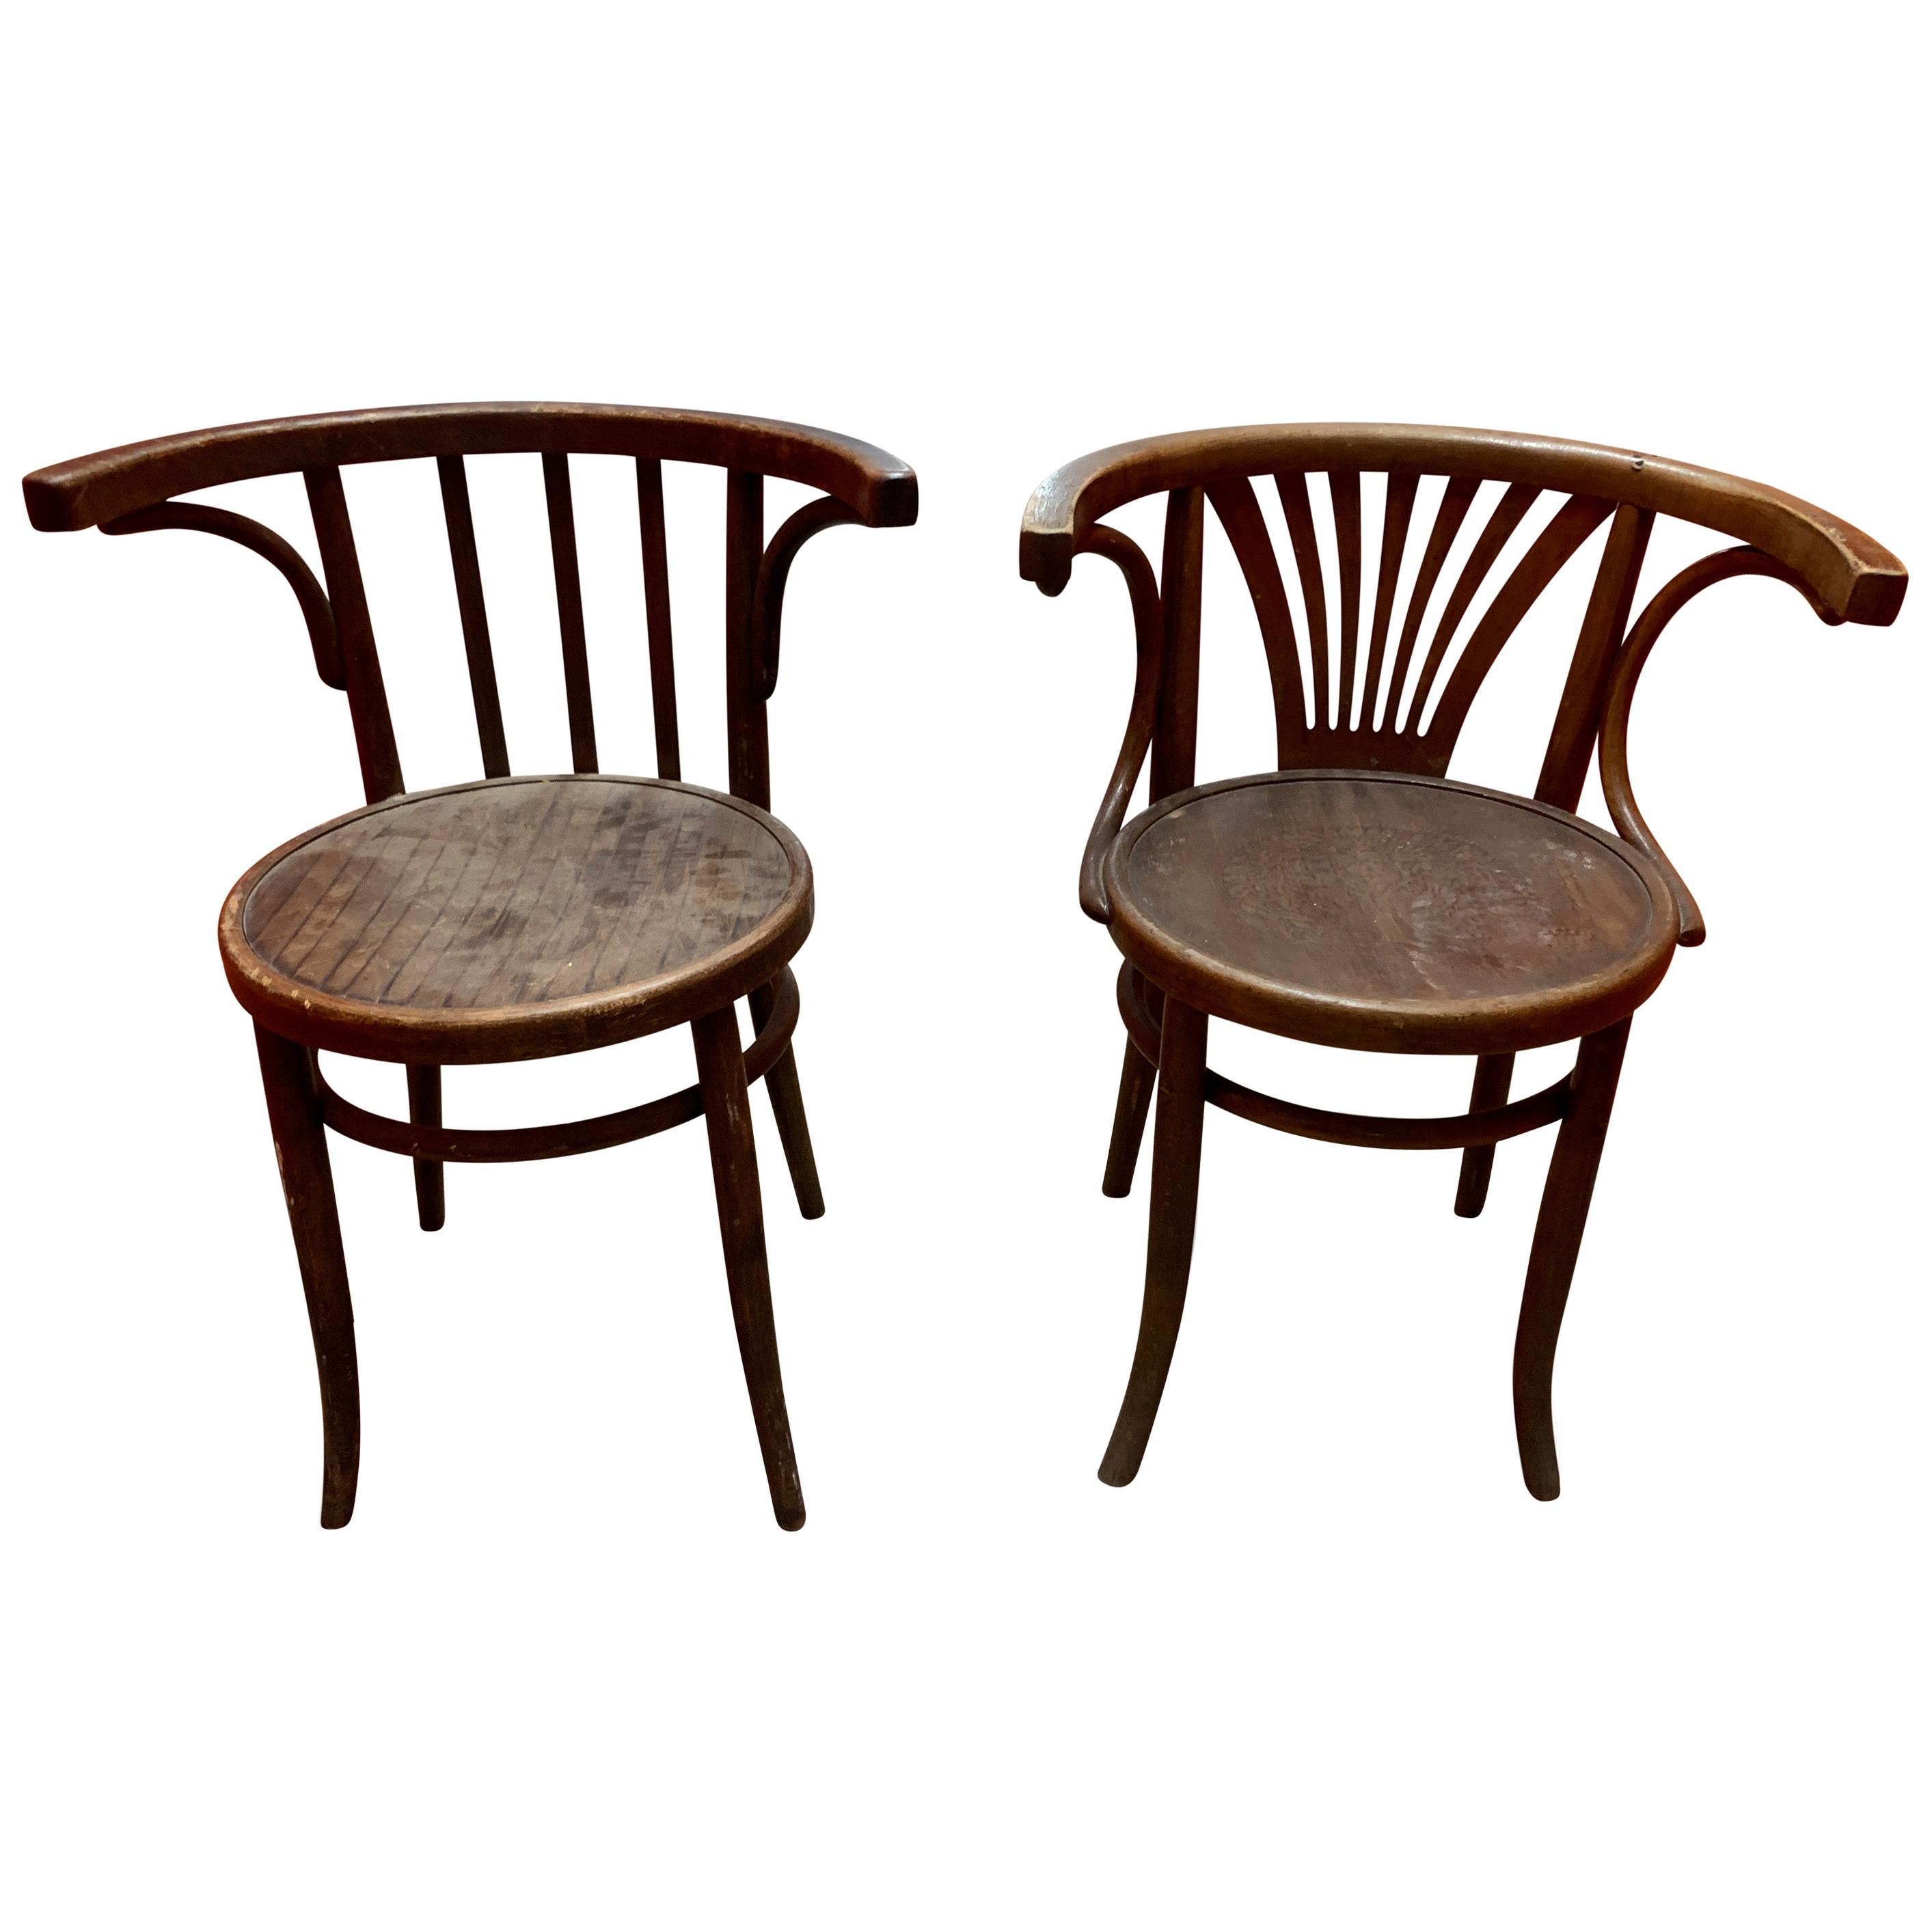 Pair of Vintage Horseshoe Dining Chairs